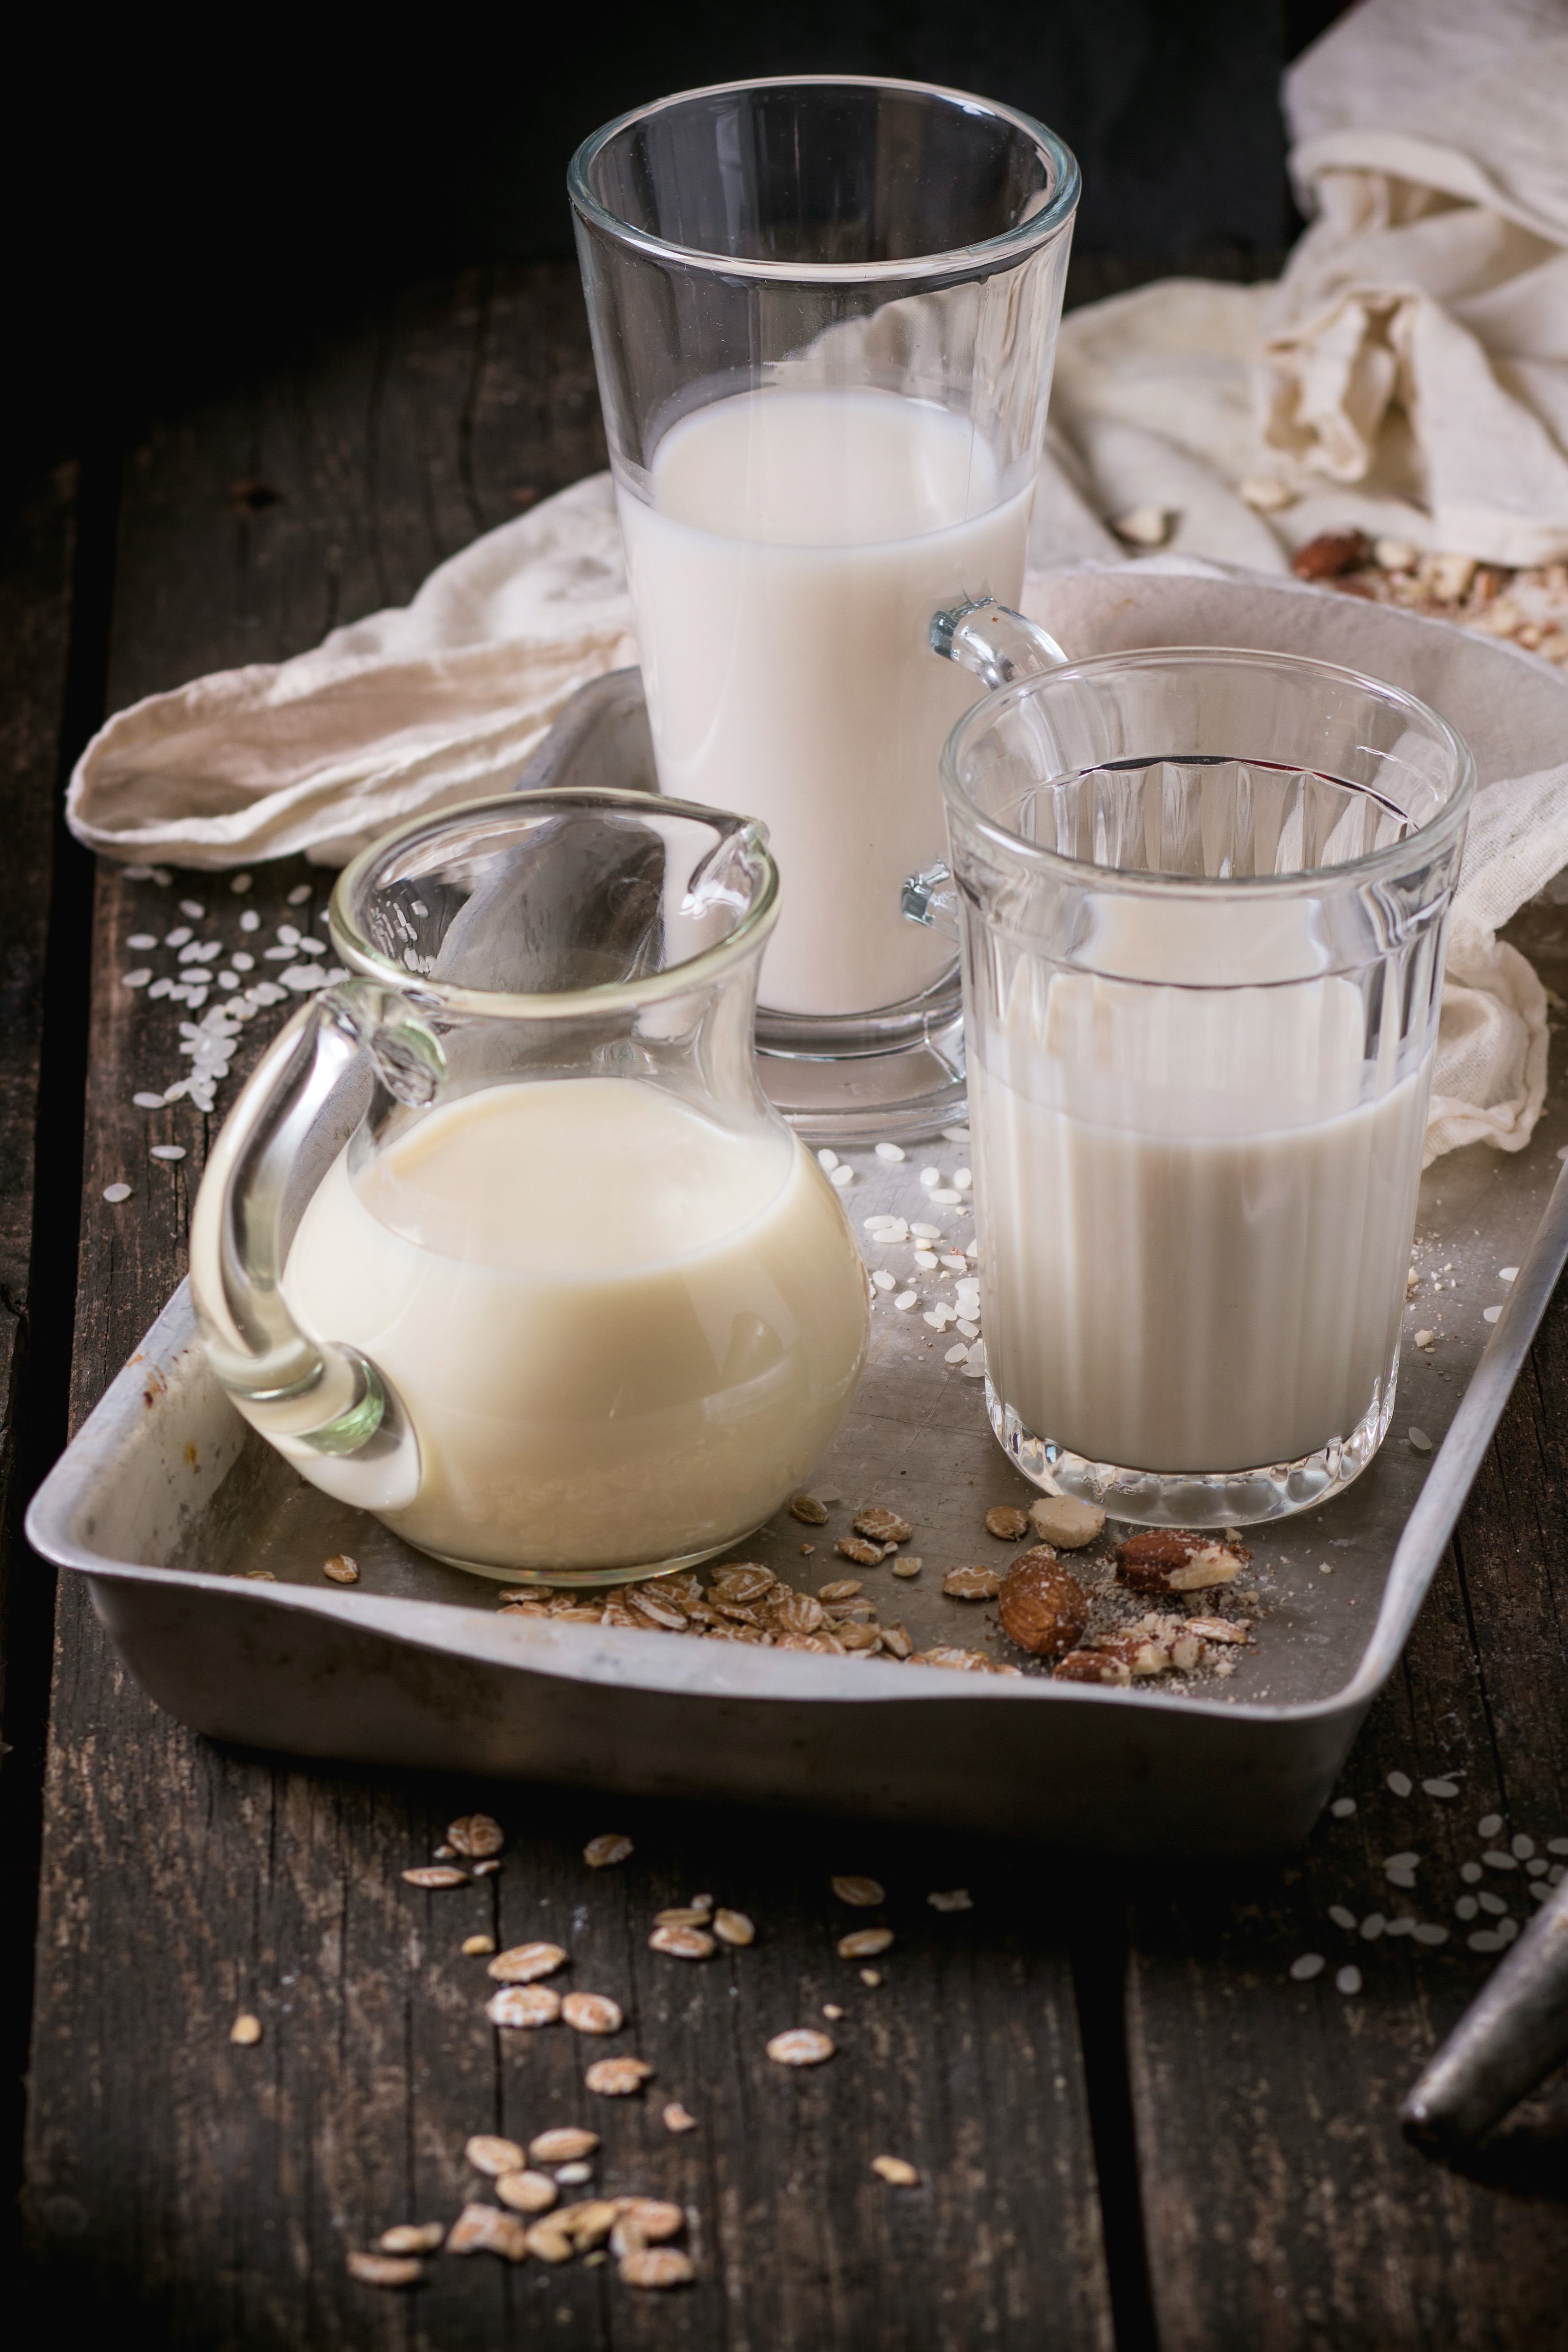 Set of non-dairy milk (rice milk, almond milk and oat milk) in glass cups and jug on old aluminum tray with rice grains, oat flakes and almond over old wooden table. Dark rustic style.